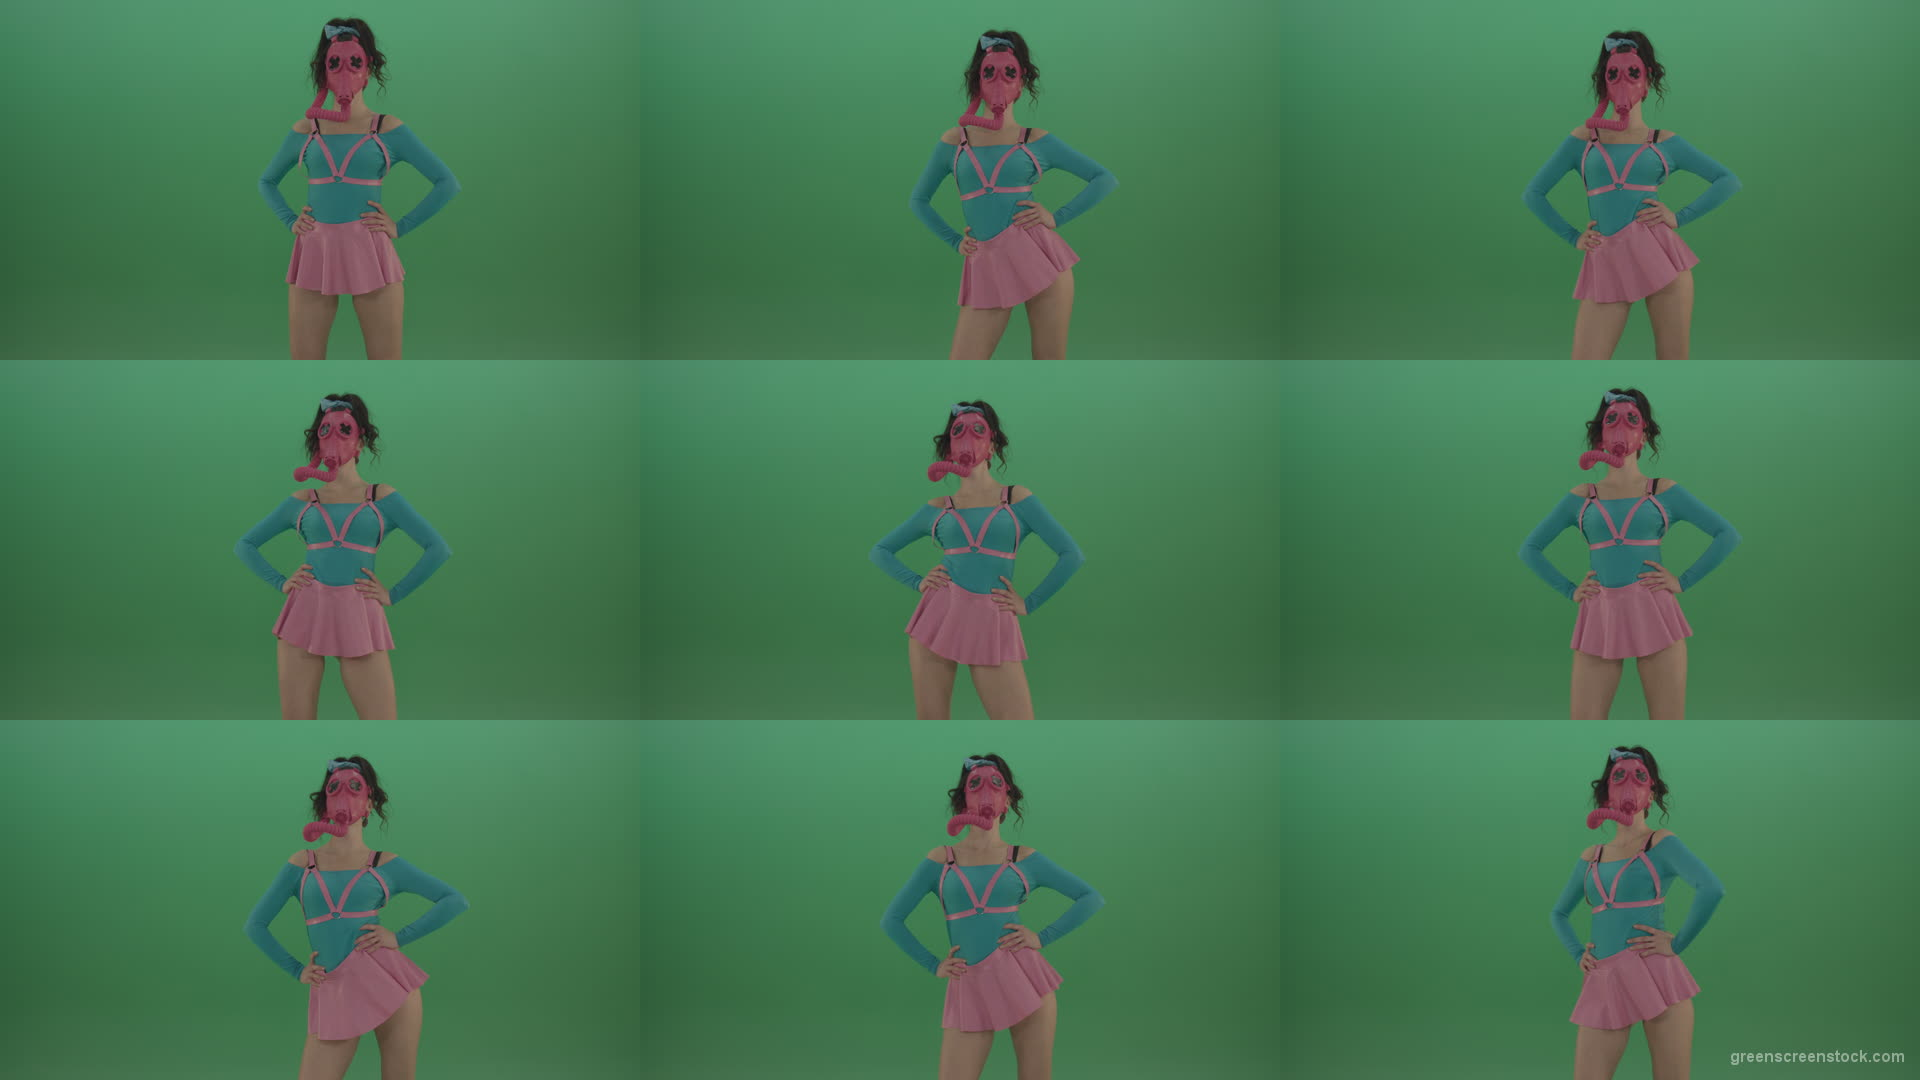 Beautiful-erotic-dance-from-a-woman-in-a-mask-in-a-pink-suit-on-green-background Green Screen Stock